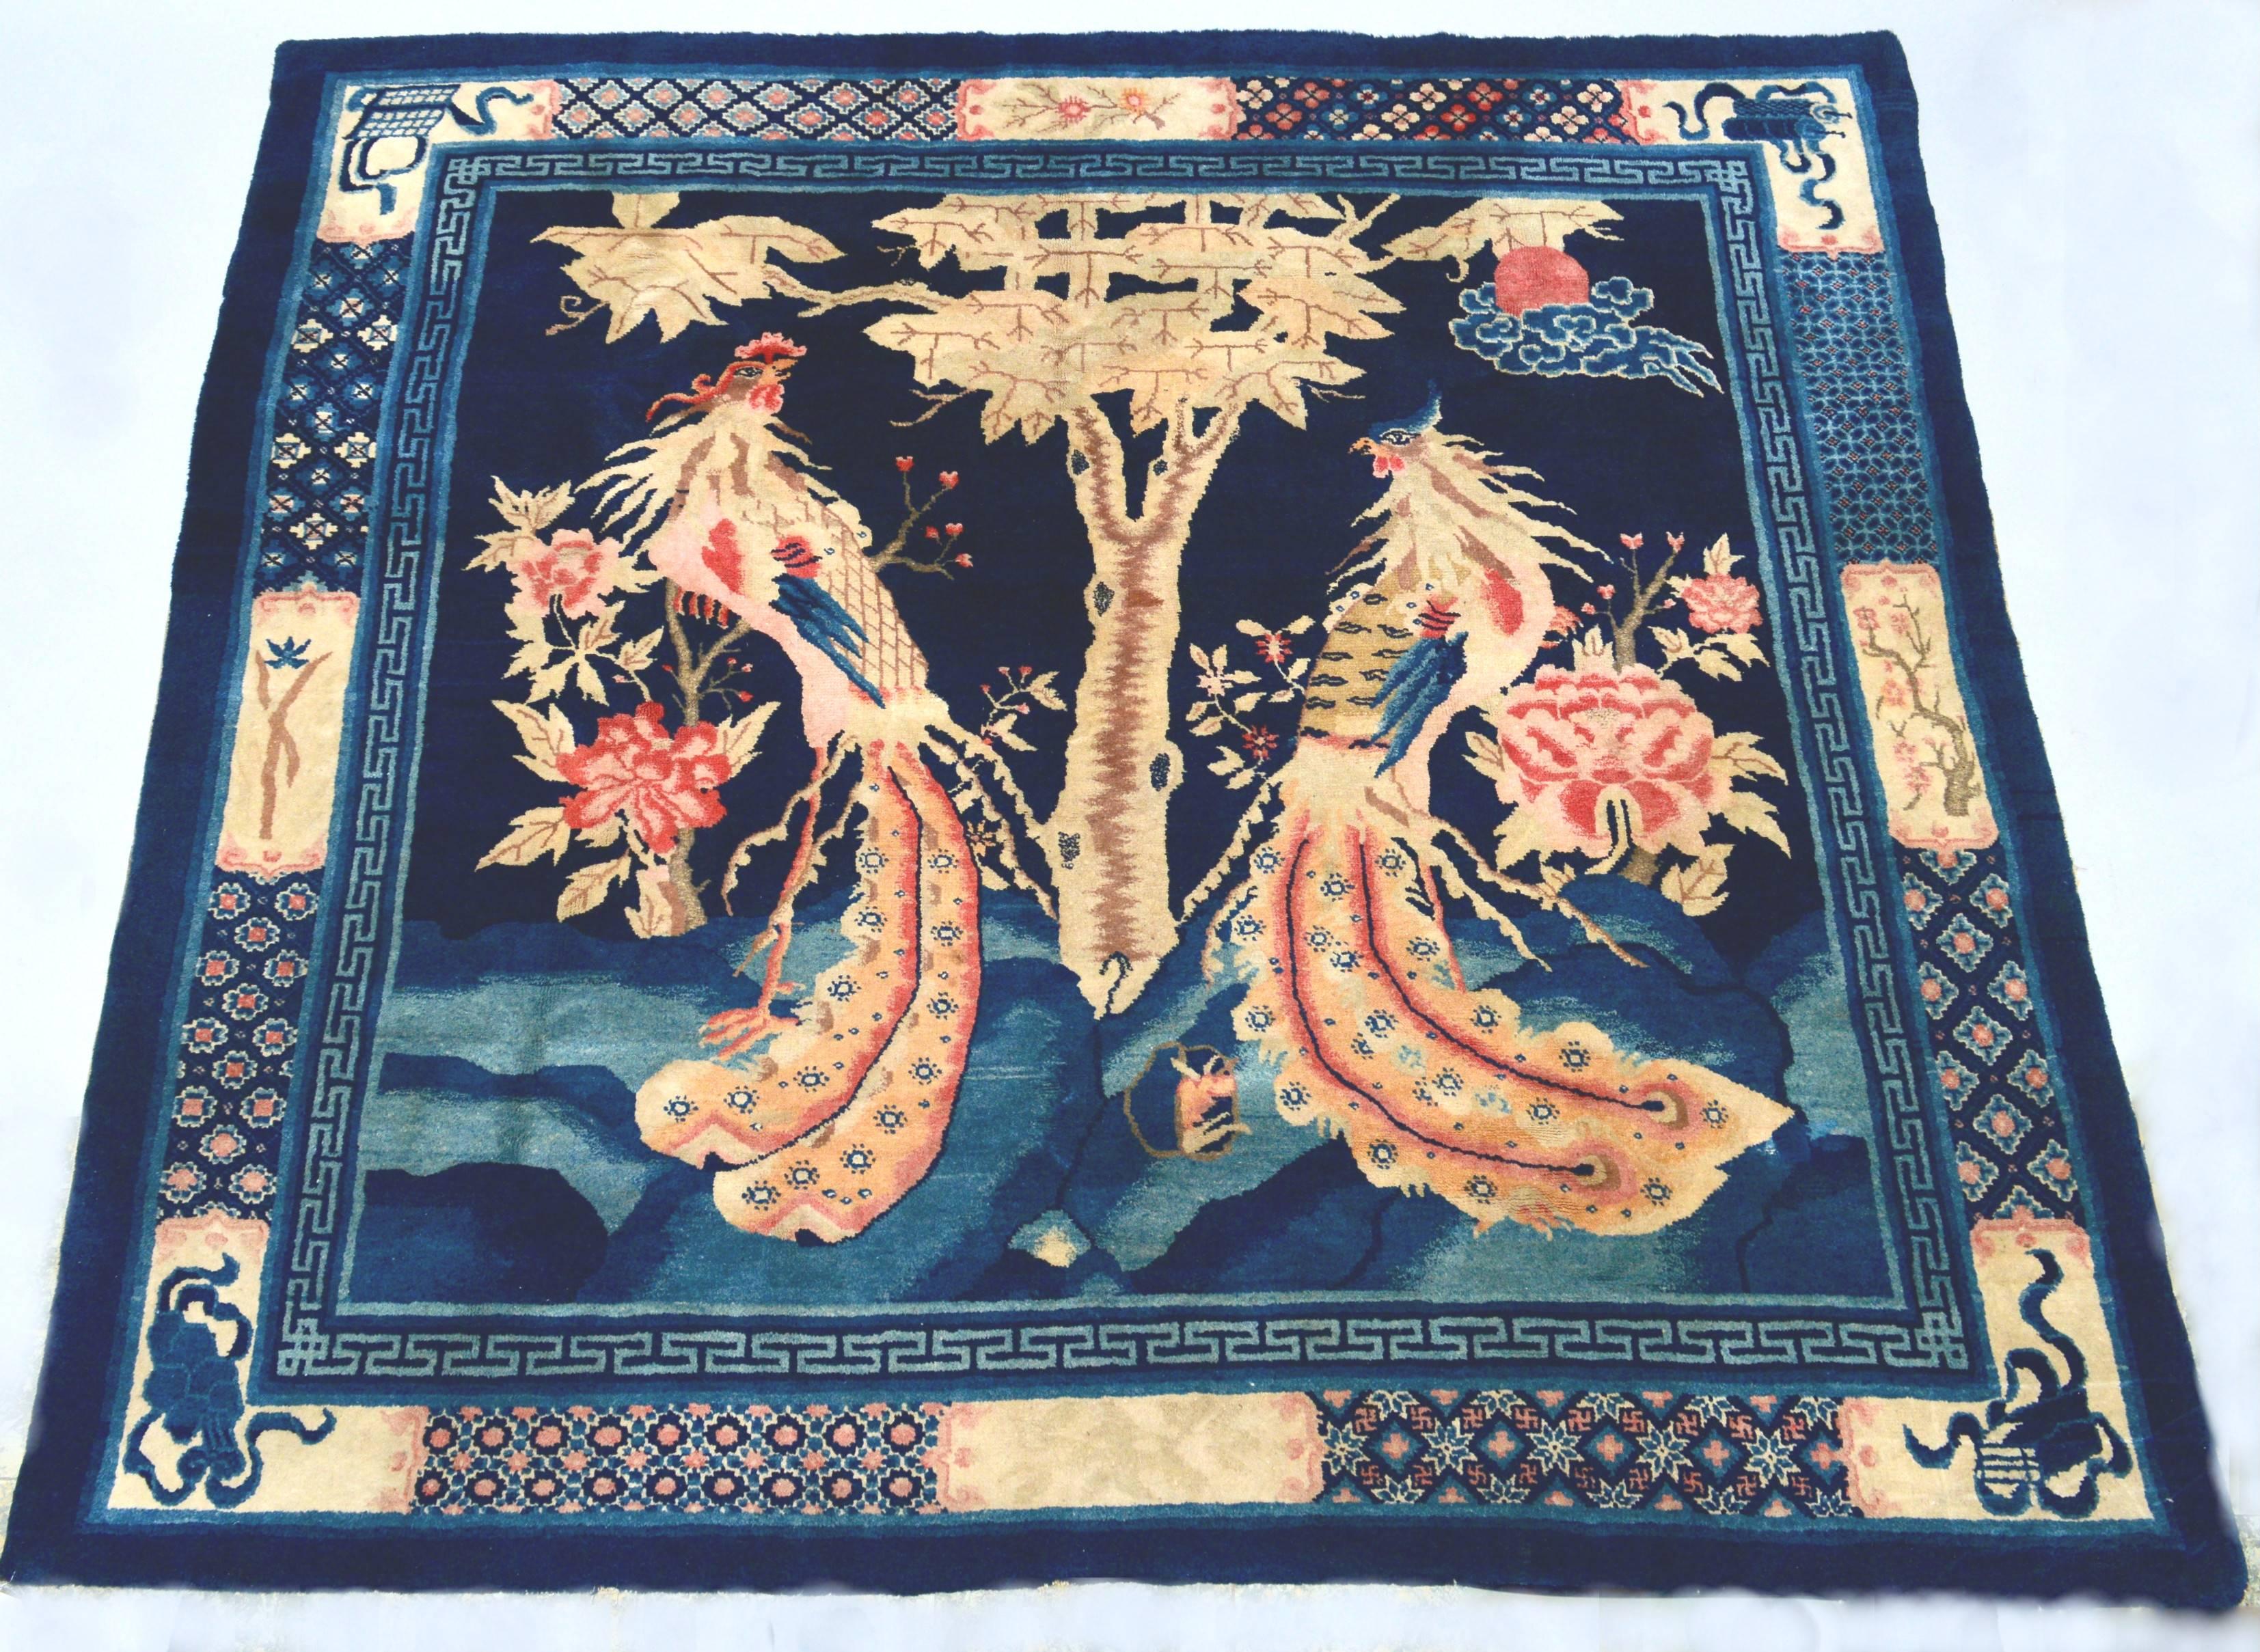 Antique Peking ceremonial phoenix carpet. A ceremonial carpet would be laid out in a receiving room .The carpet would be placed on the floor in front of chairs where the owner would receive an important visitor or member of court. 
The male and